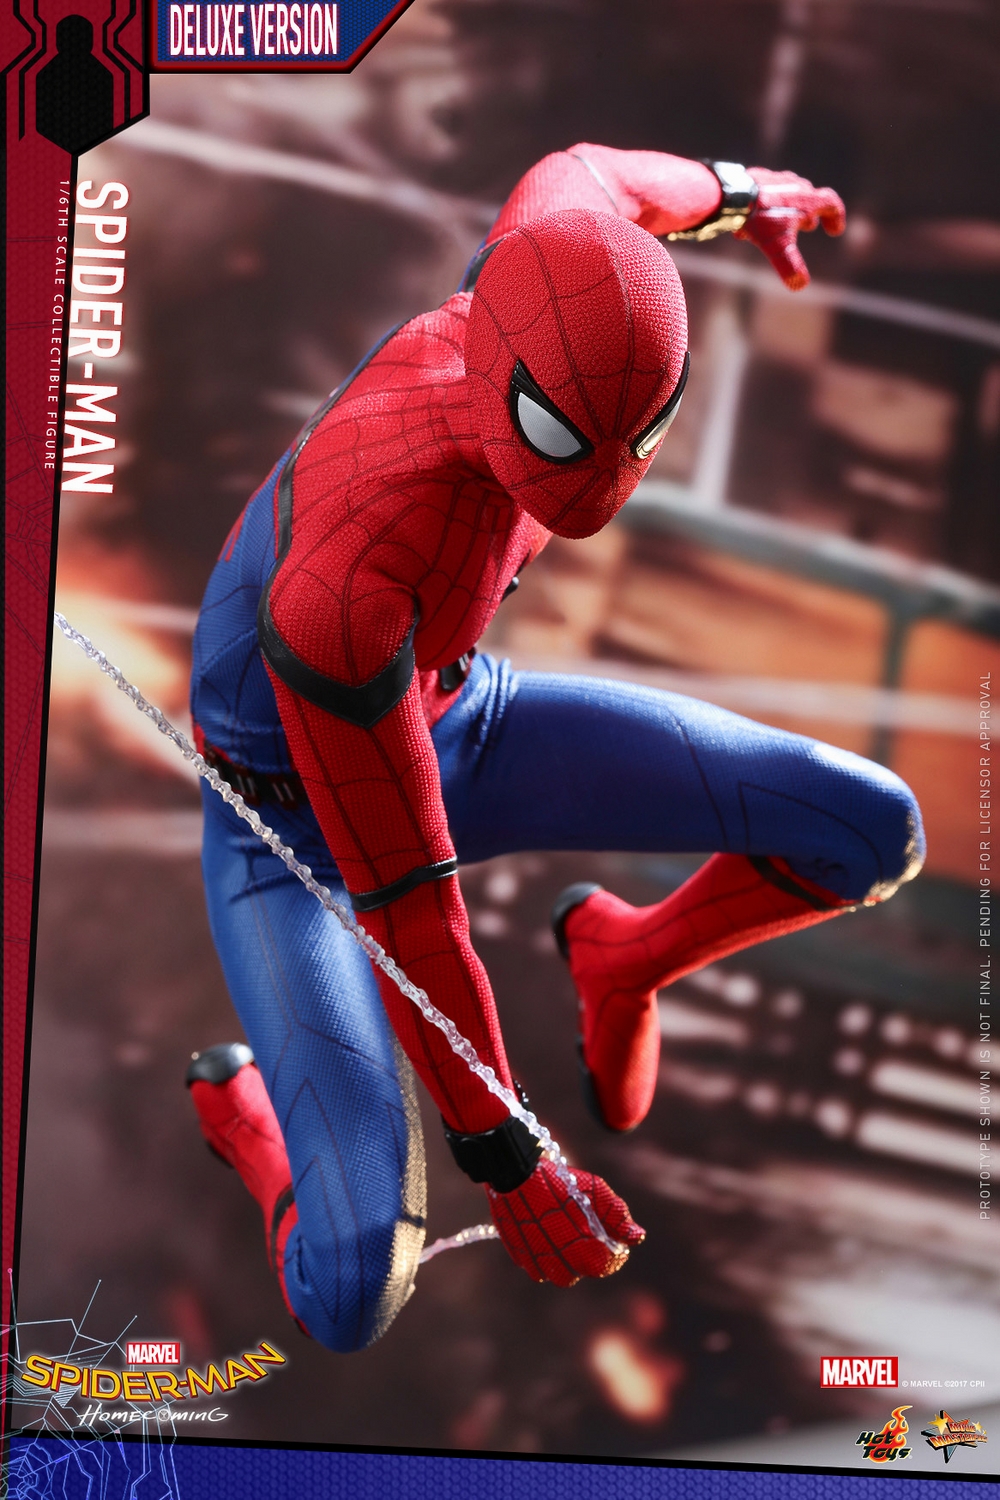 Hot-Toys-MMS426-Spider-Man-Homecoming-Deluxe-013.jpg